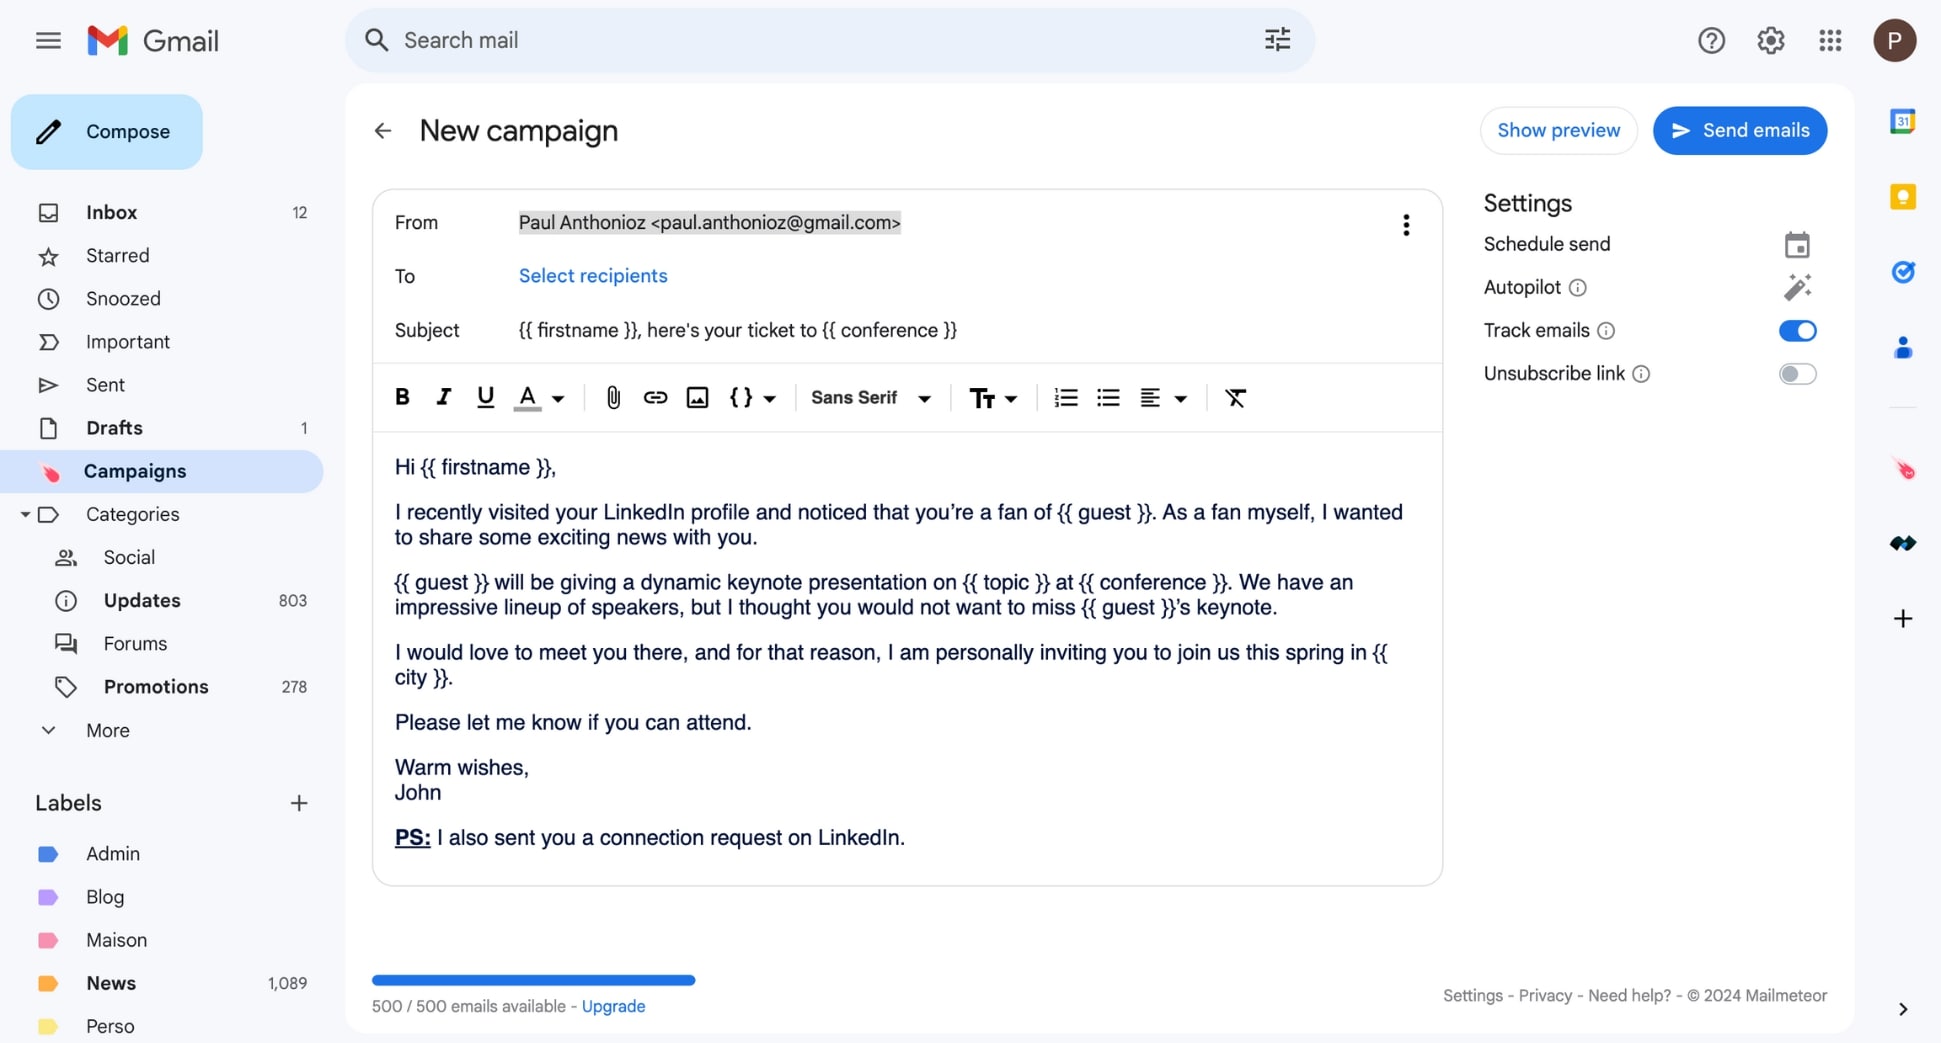 Example of a Gmail mail merge